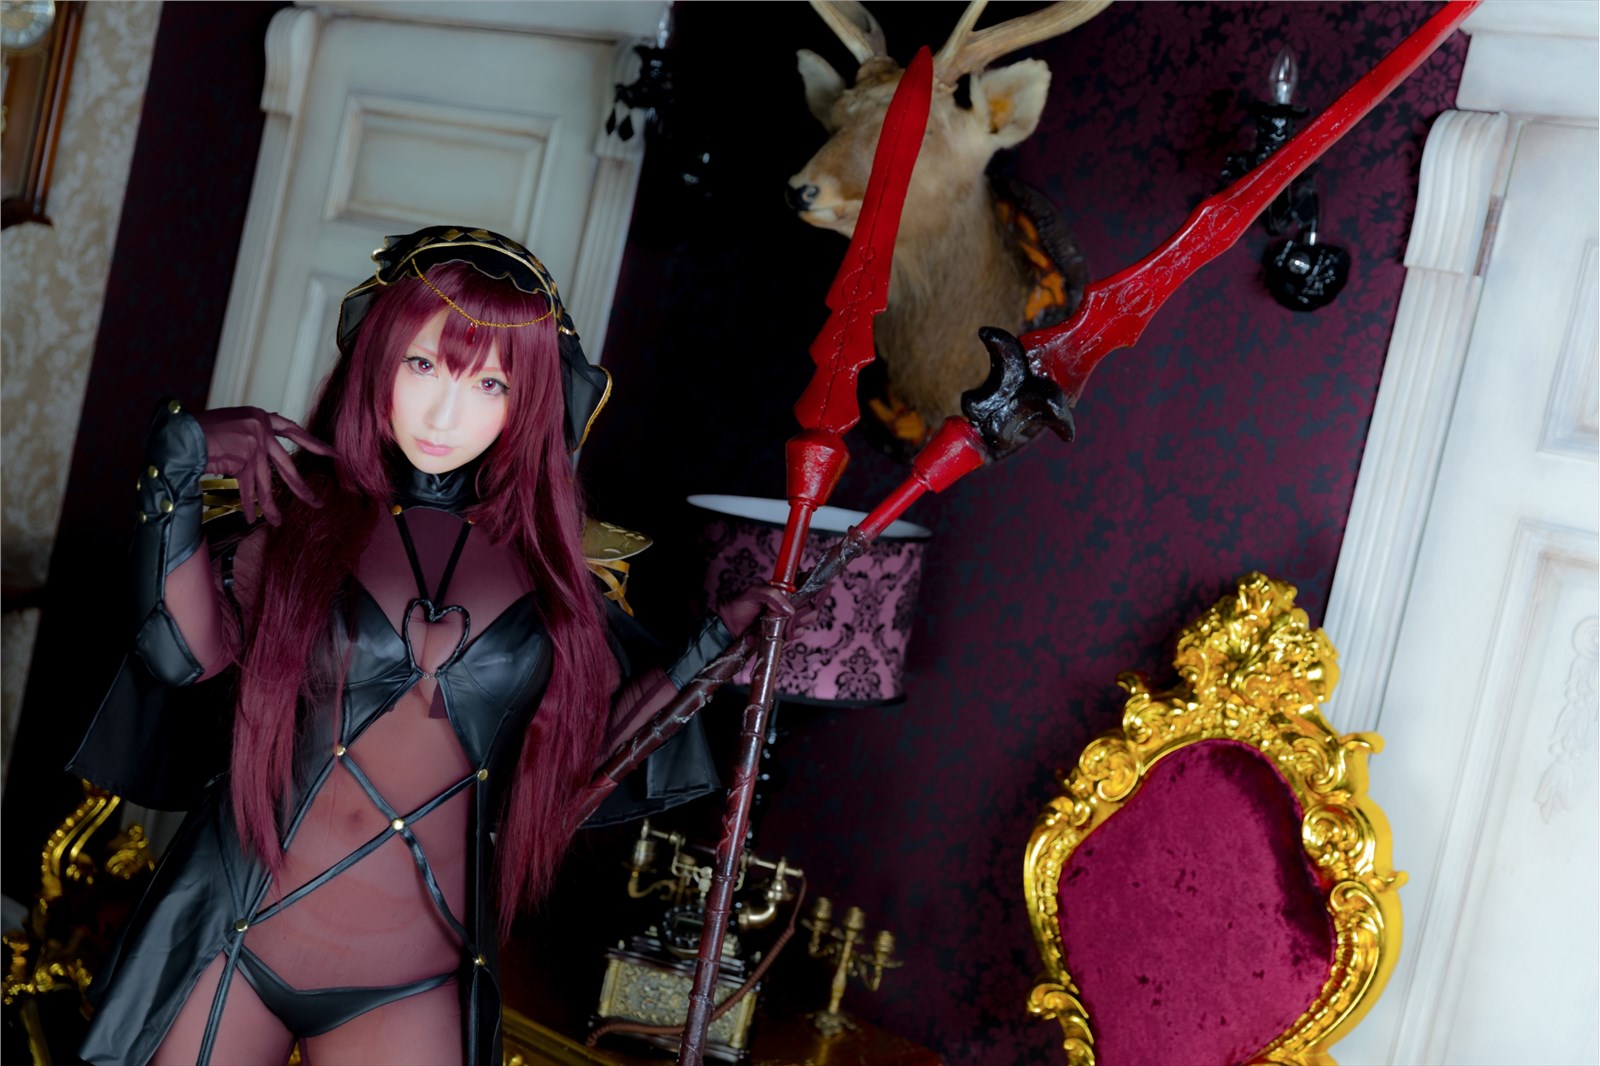 cos (Cosplay)(C92) Shooting Star (サク) Shadow Queen 598MB1(68)